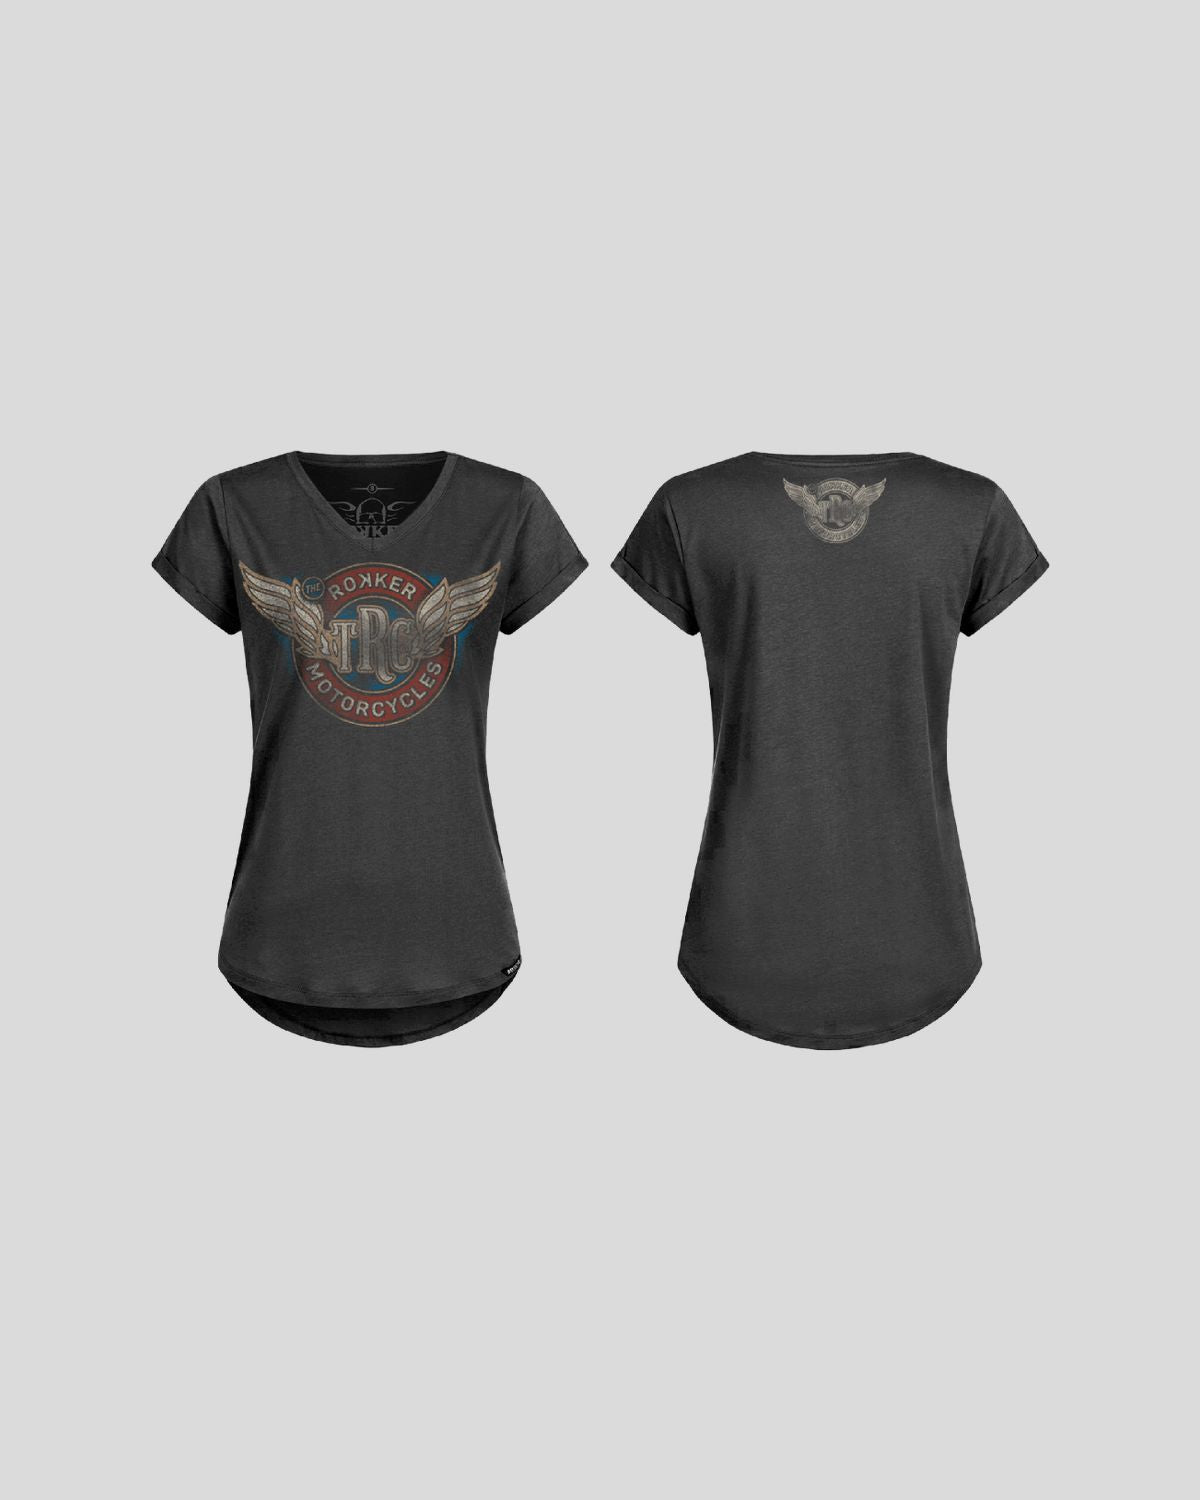 Wings Lady Black Shirts & Tops The Rokker Company 